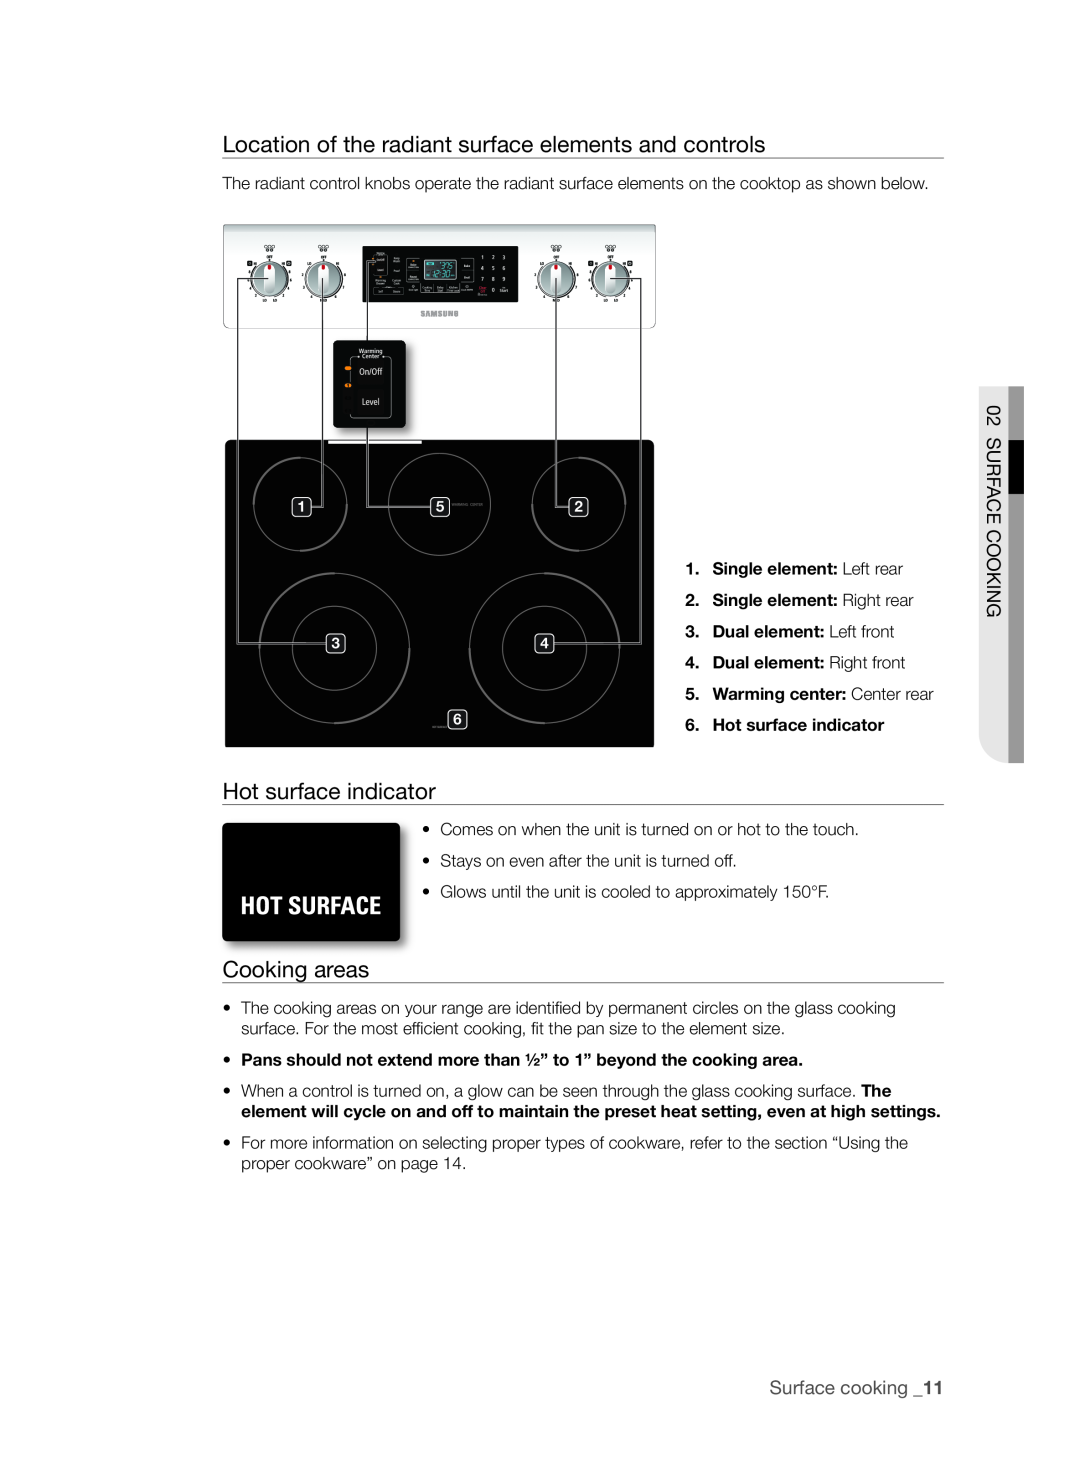 Samsung FTQ353 user manual Location of the radiant surface elements and controls, Hot surface indicator, Cooking areas 